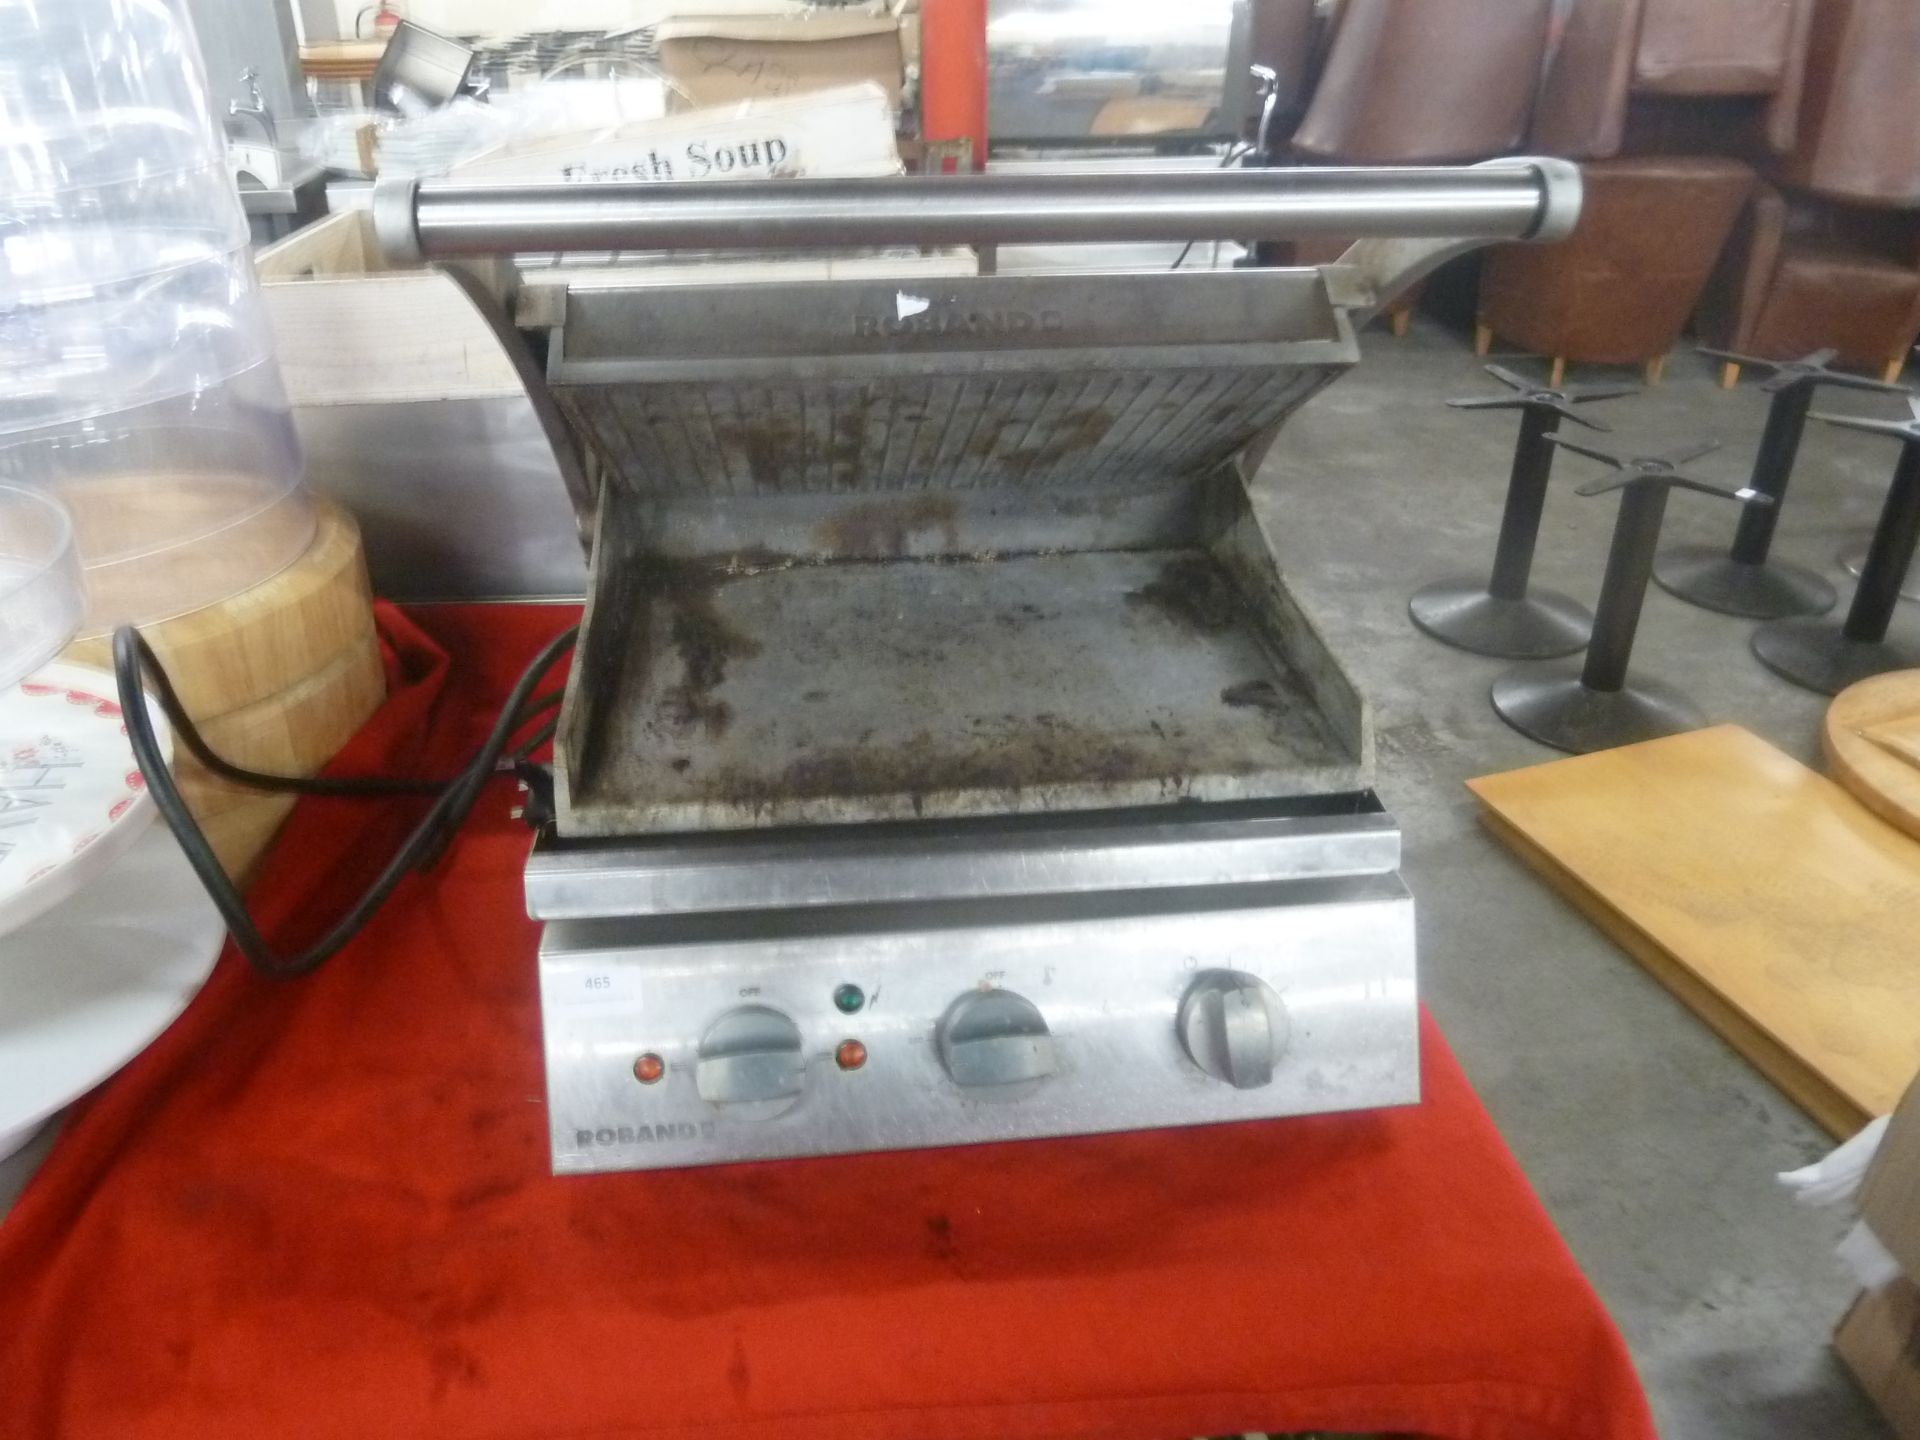 *Roband contact grill - single phase. 375w x 280d cooking area - Image 2 of 2